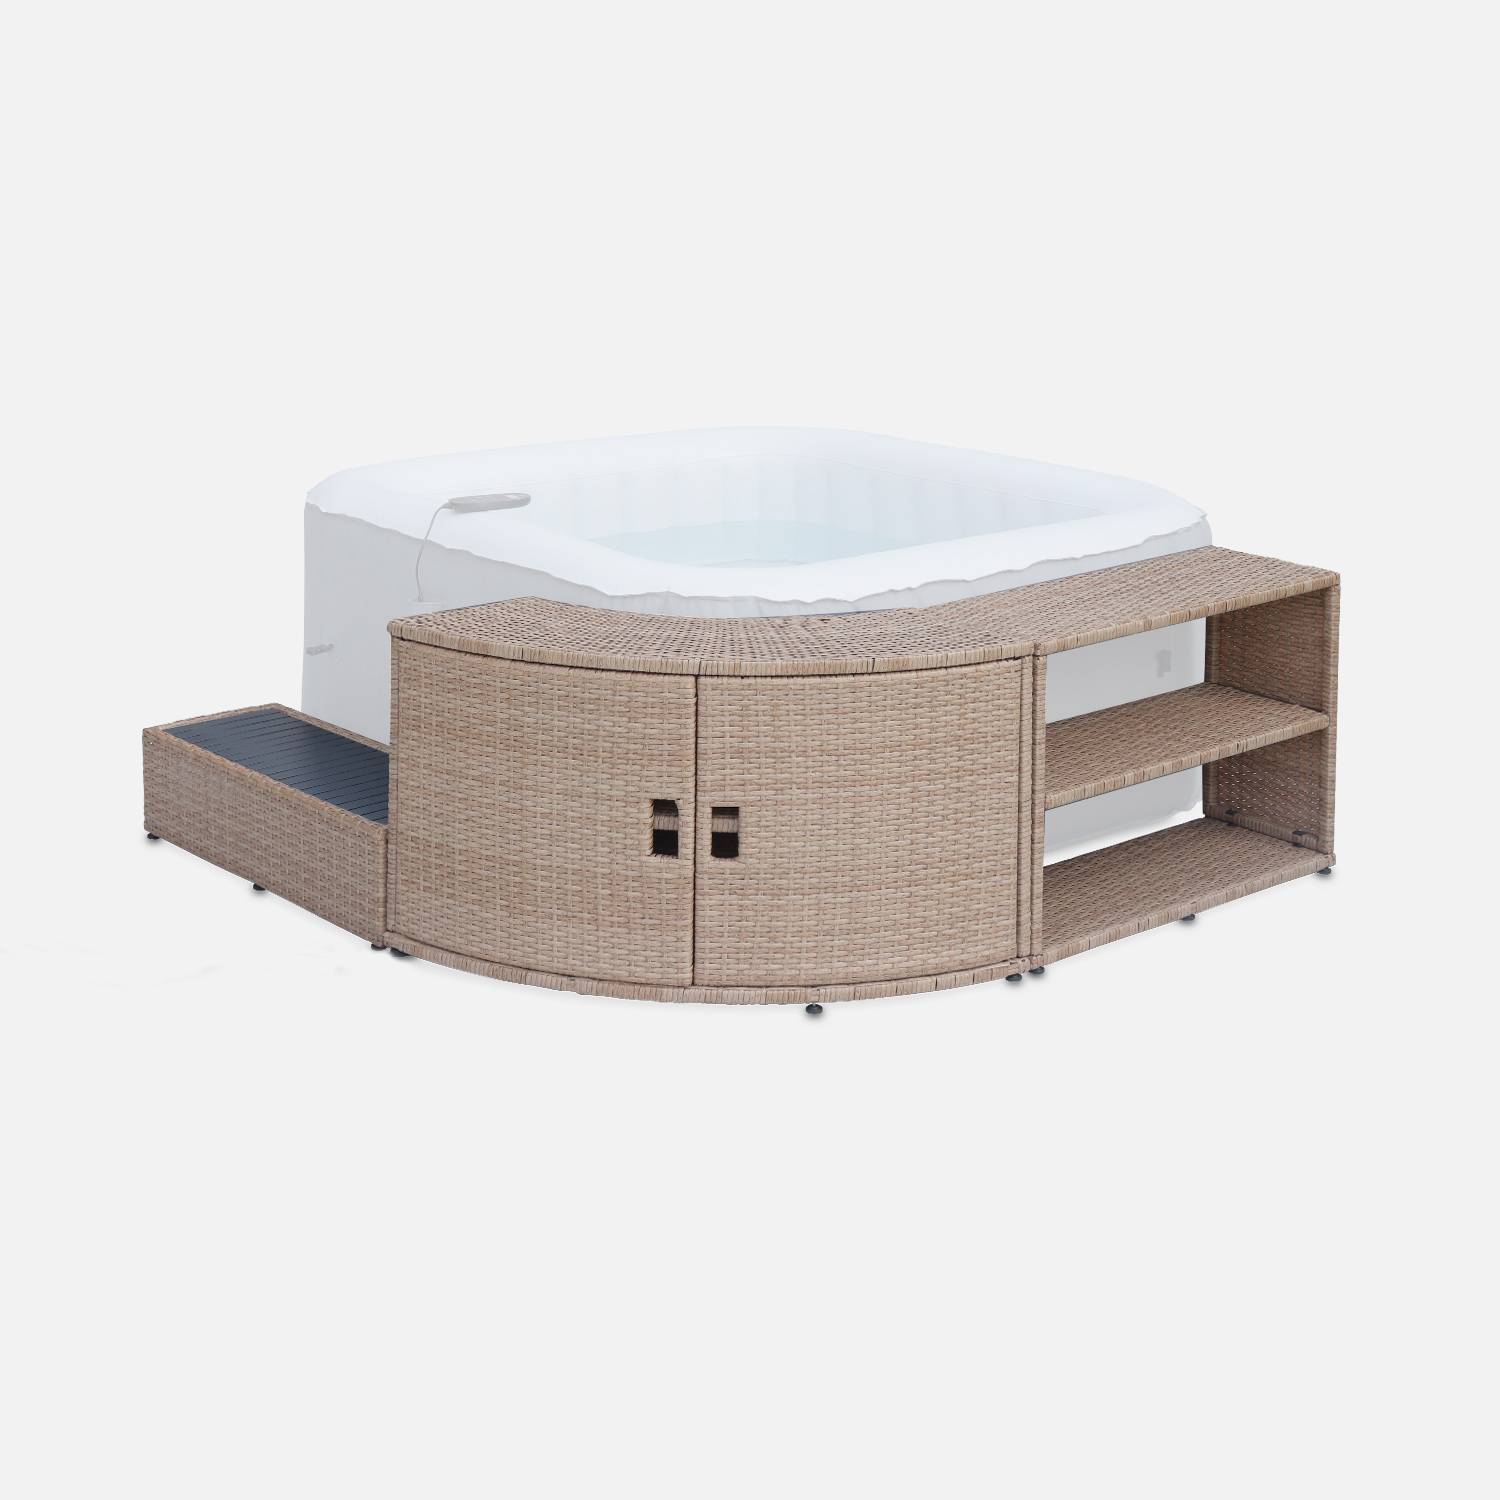 Natural polyrattan surround for square hot tub with cabinet, shelf and footstep,sweeek,Photo1